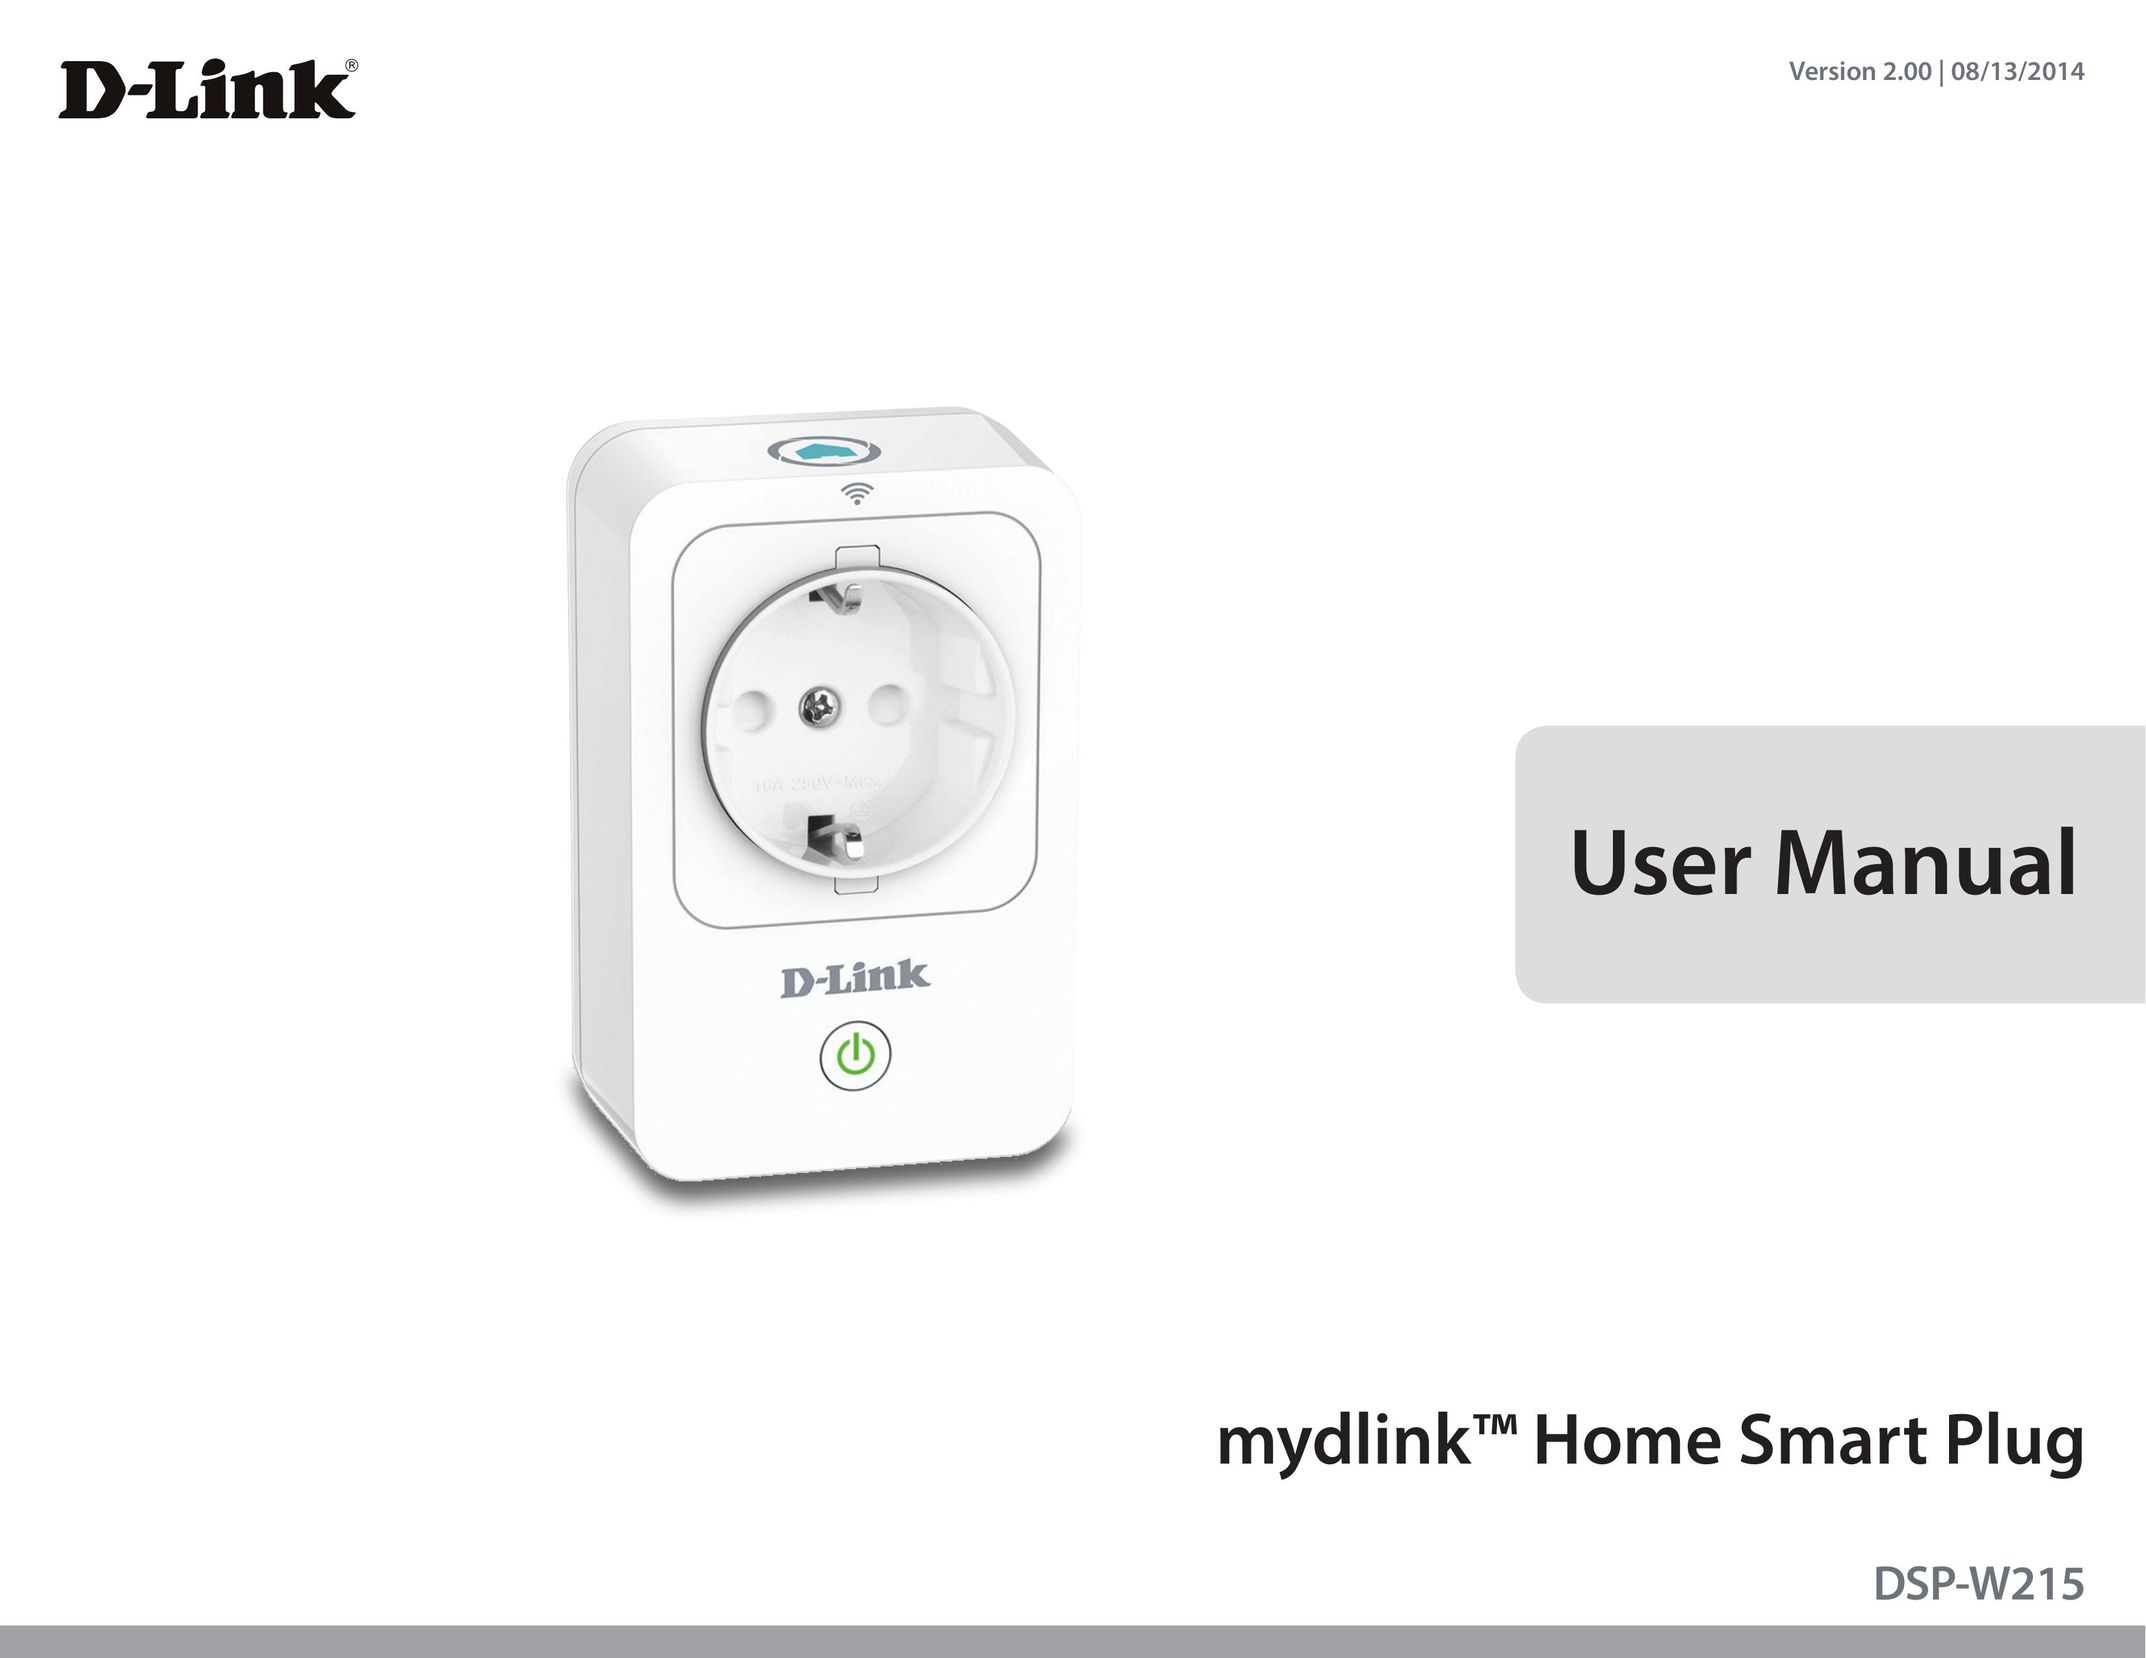 D-Link DSP-W215 Cell Phone User Manual